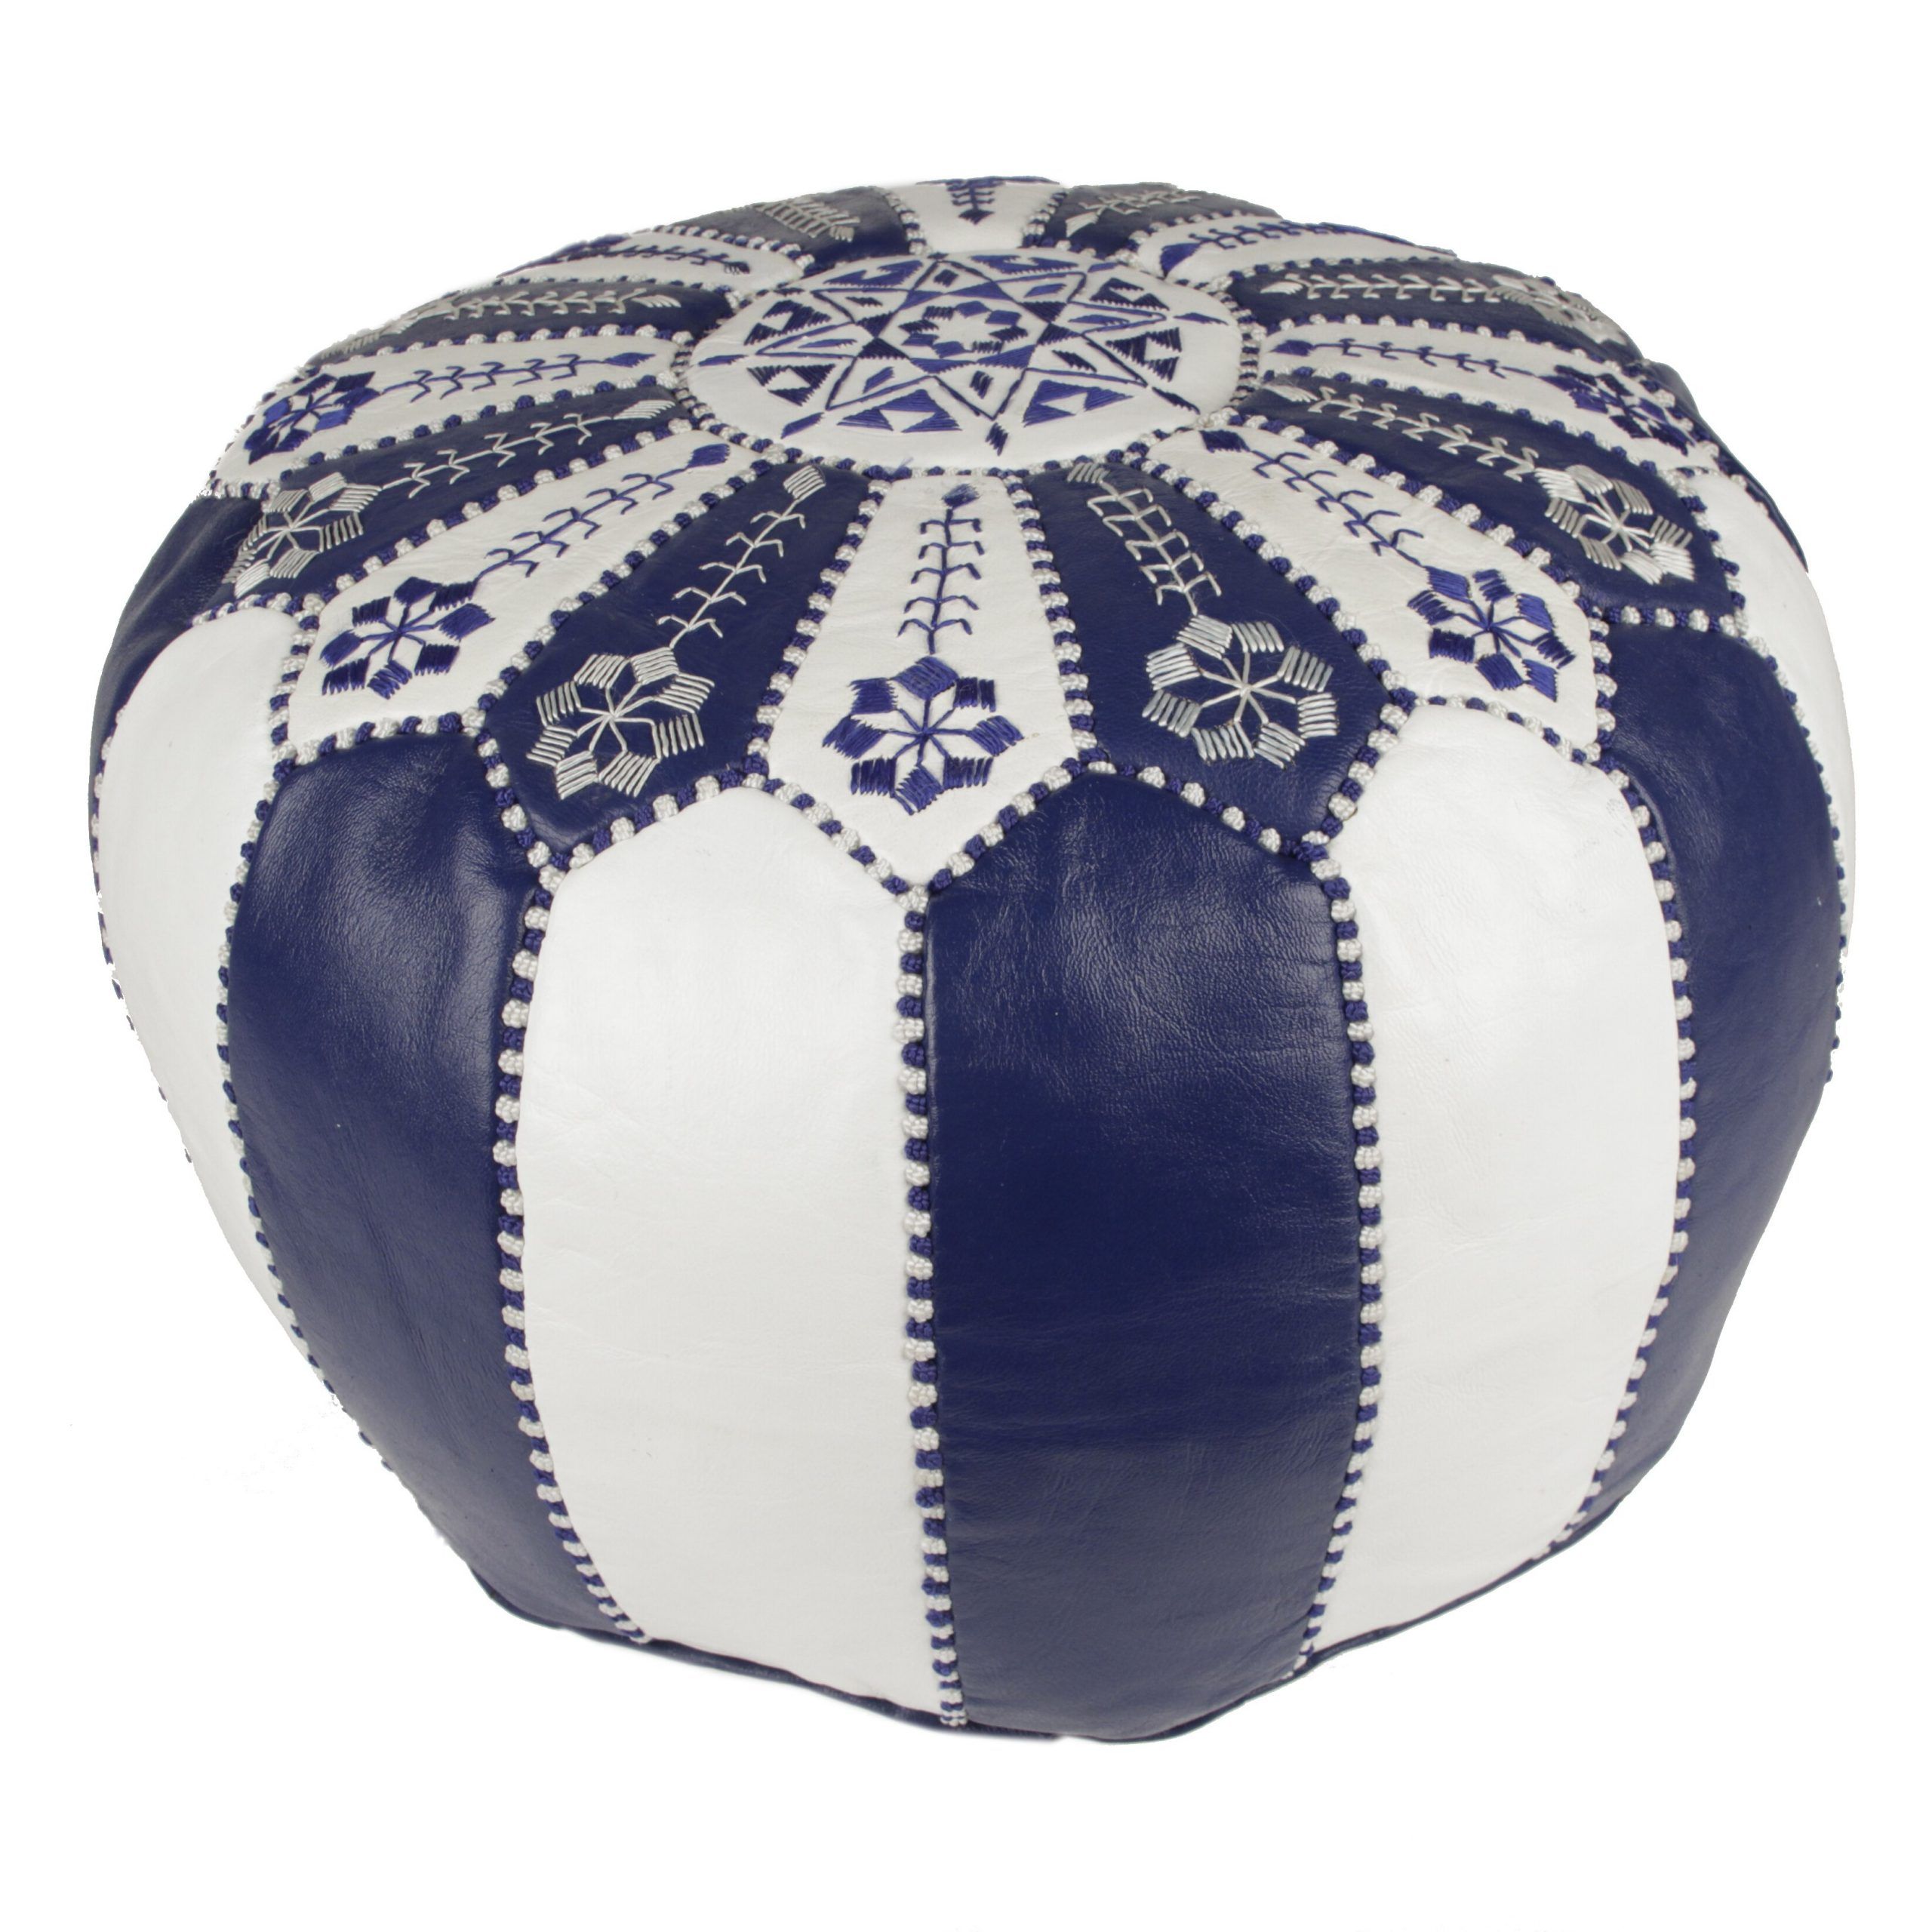 Popular Casablanca Market Moroccan Embroidered Pouf Ottoman (View 5 of 10)